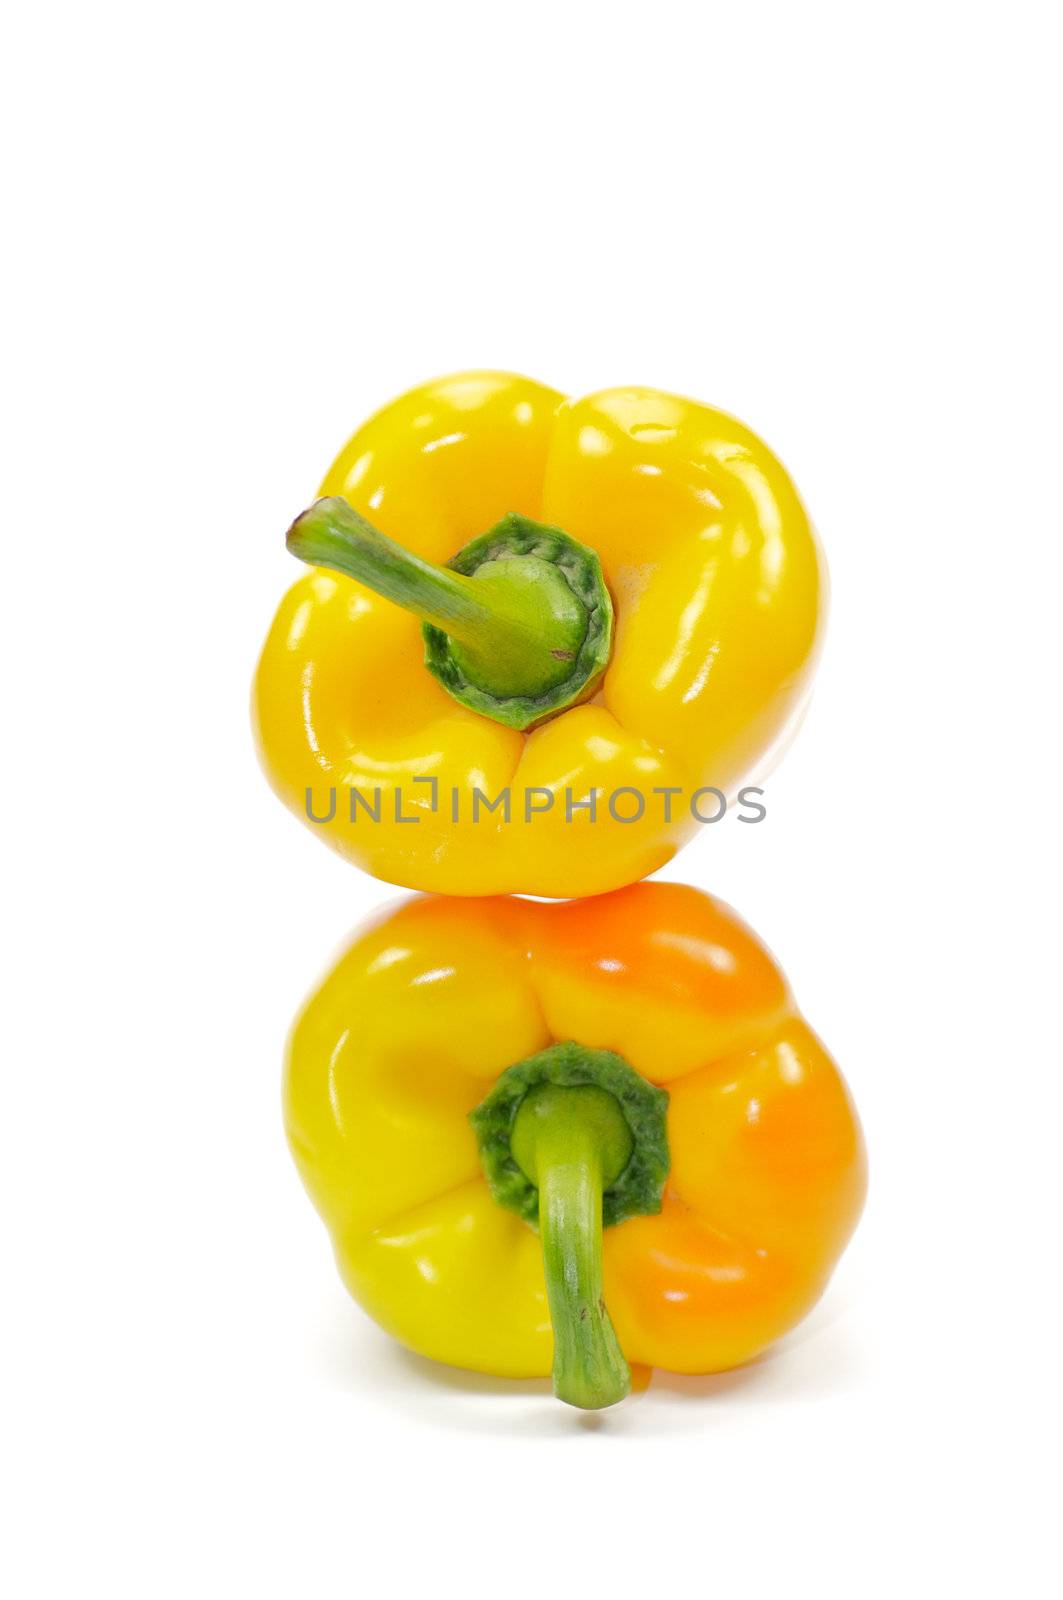 Two yellow bell peppers by zhekos